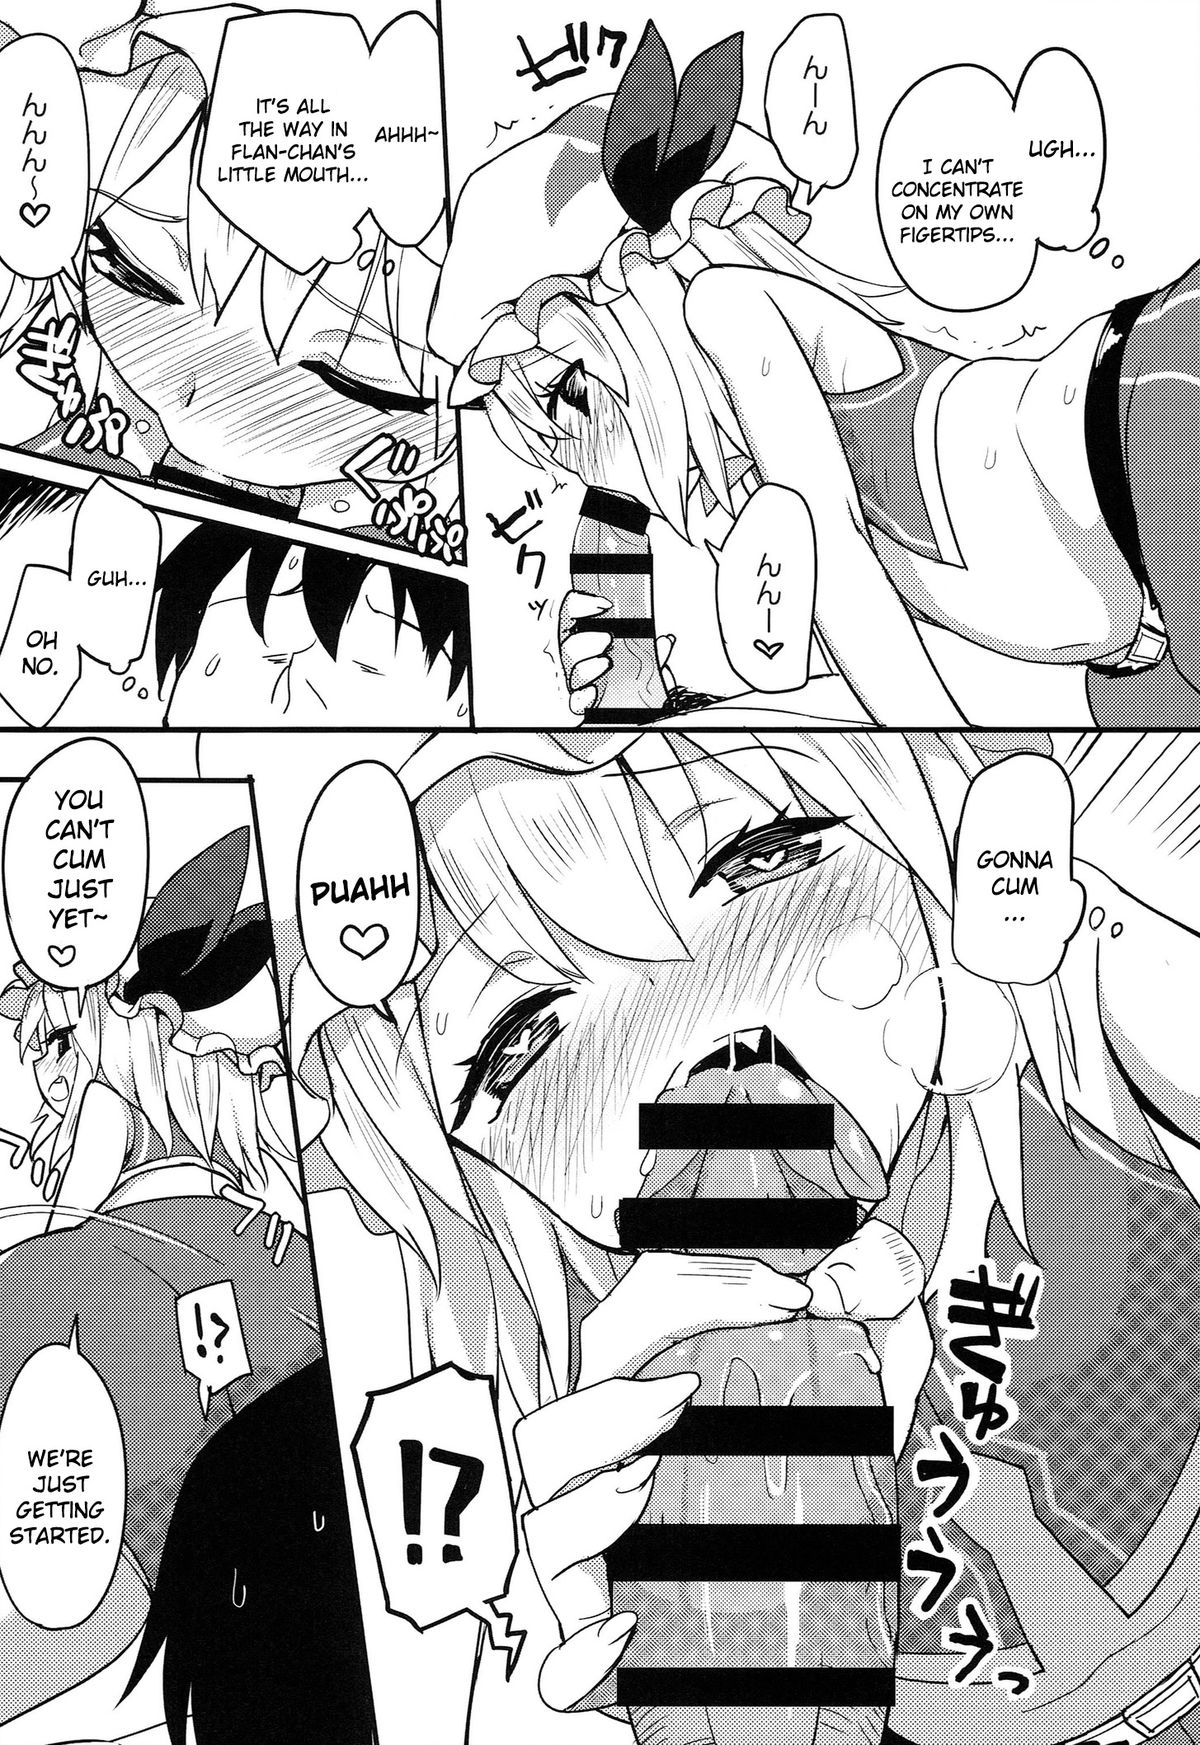 (Reitaisai 11) [TUKIBUTO (Chameleon)] Flandre Hen (TOUHOU RACE QUEENS COLLABO CLUB -SCARLET SISTERS-) (Touhou Project) [English] [sureok1] page 4 full